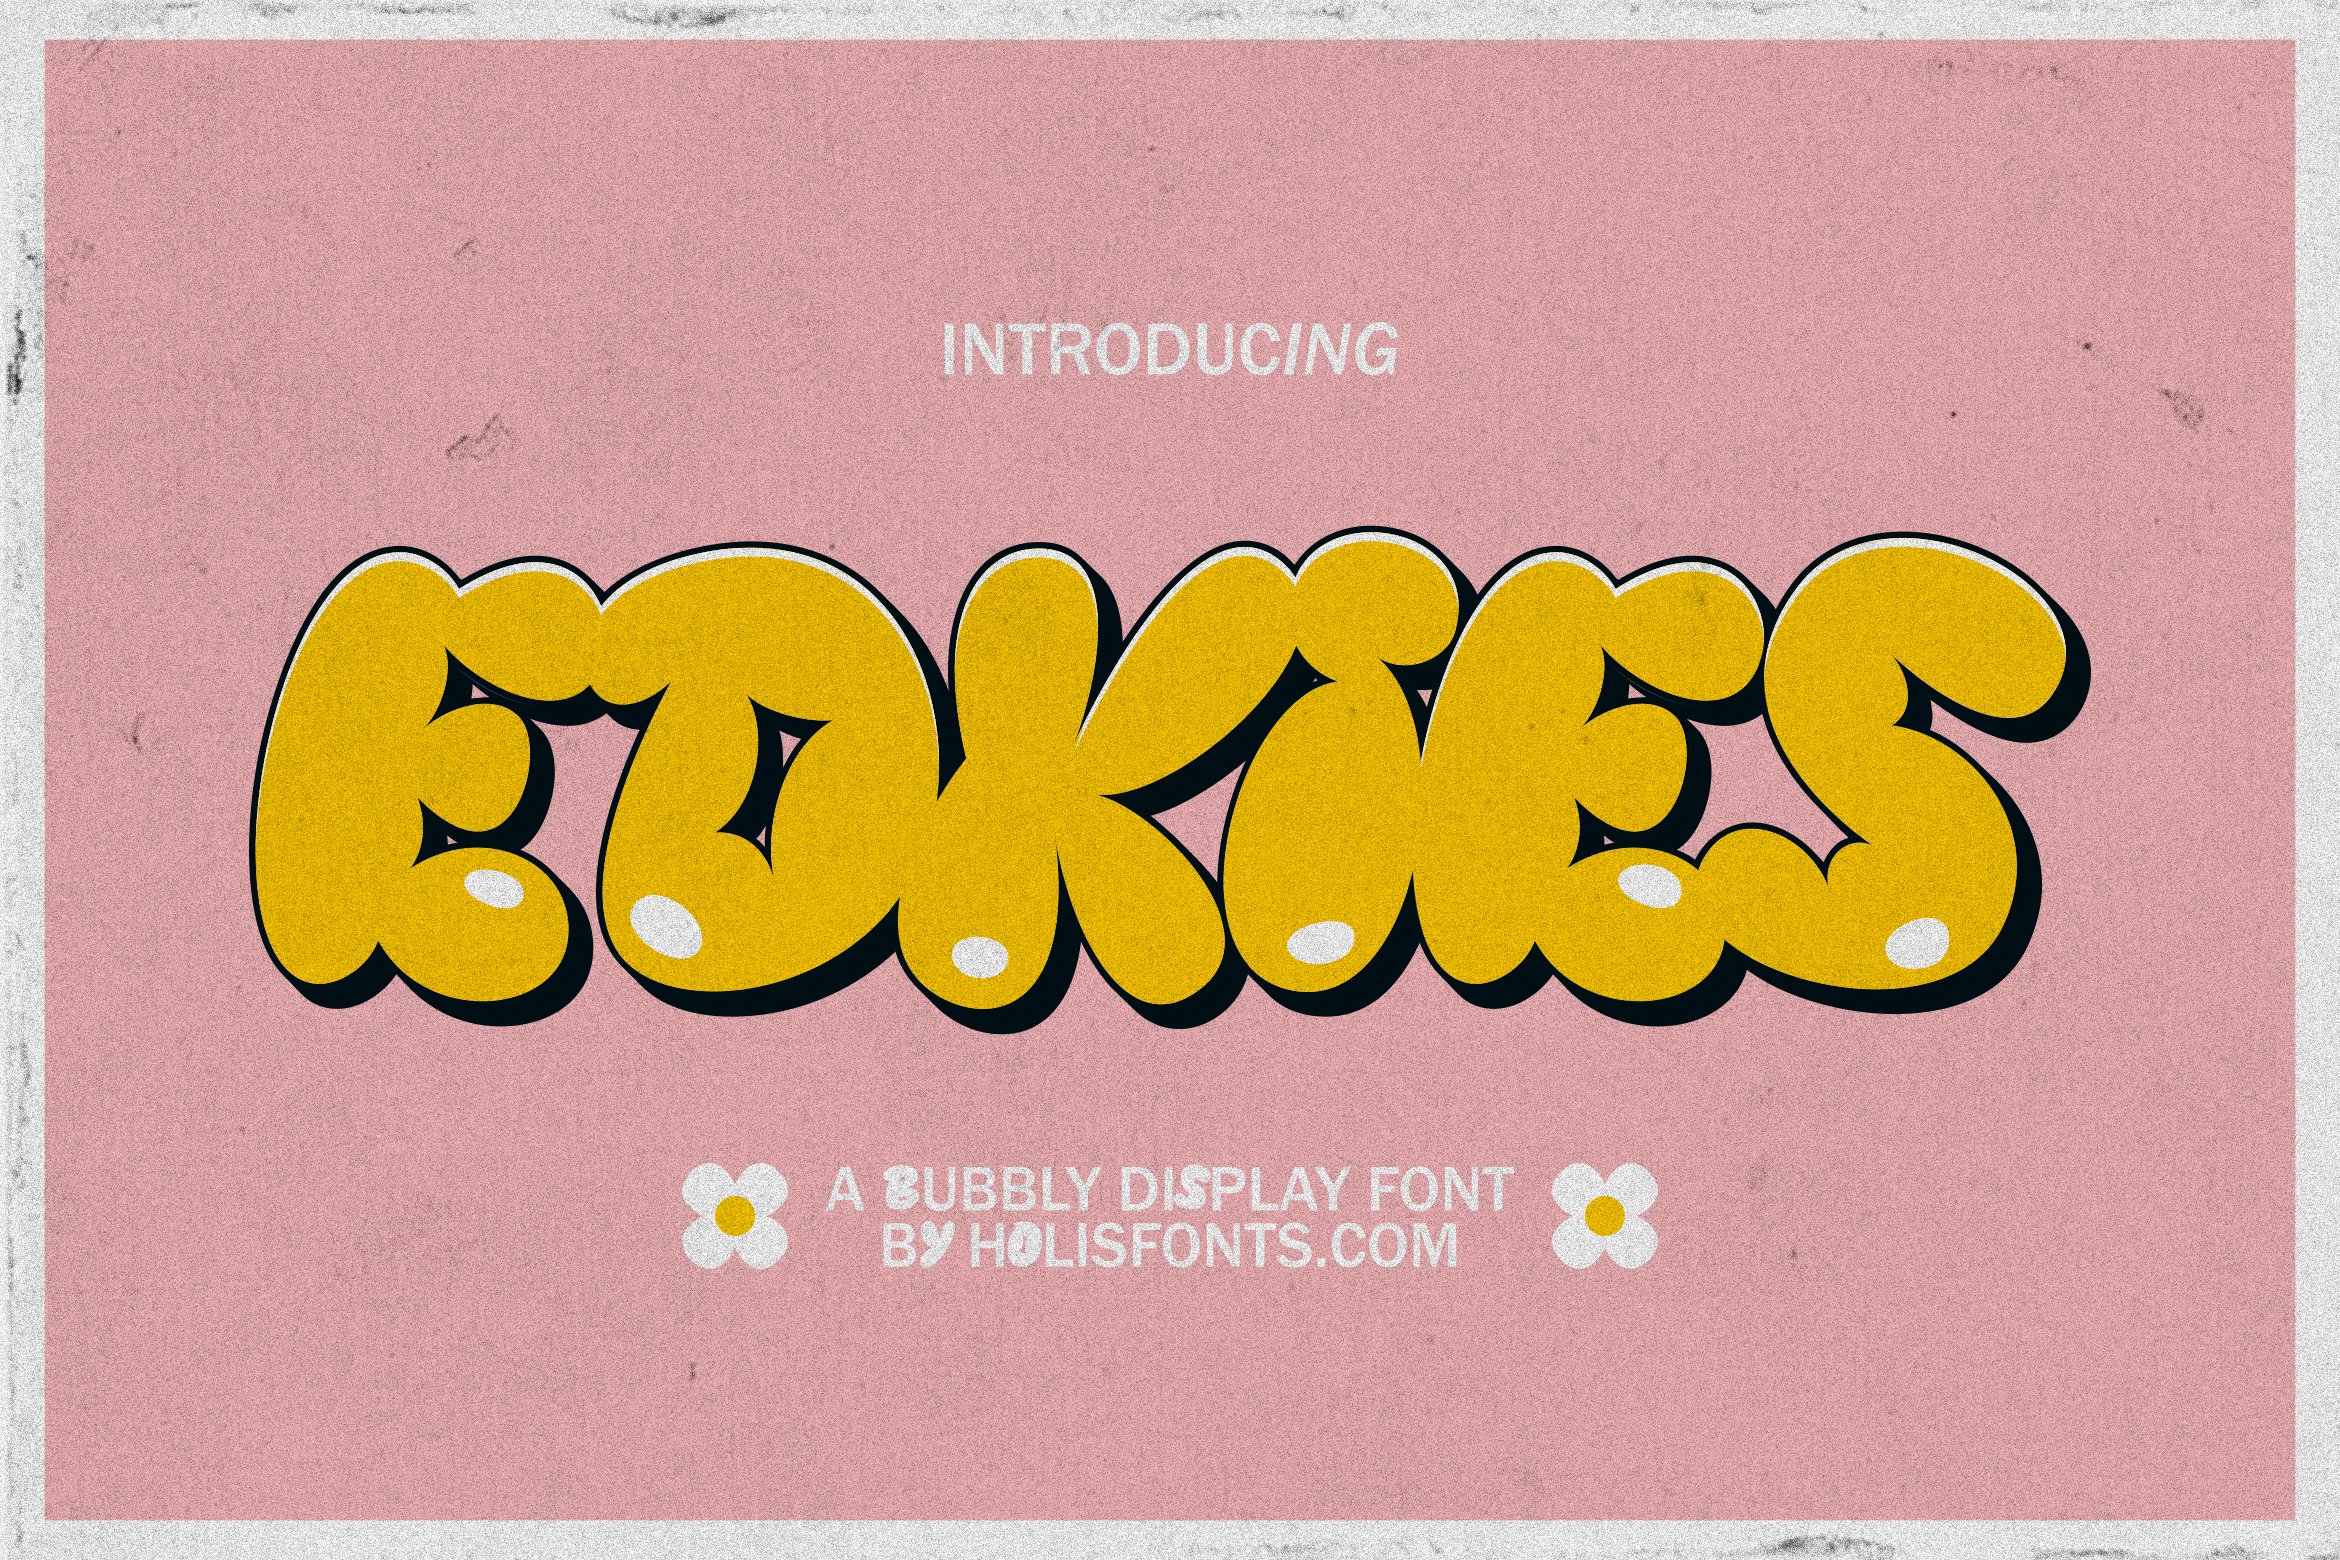 Edkies Bubbly cover image.